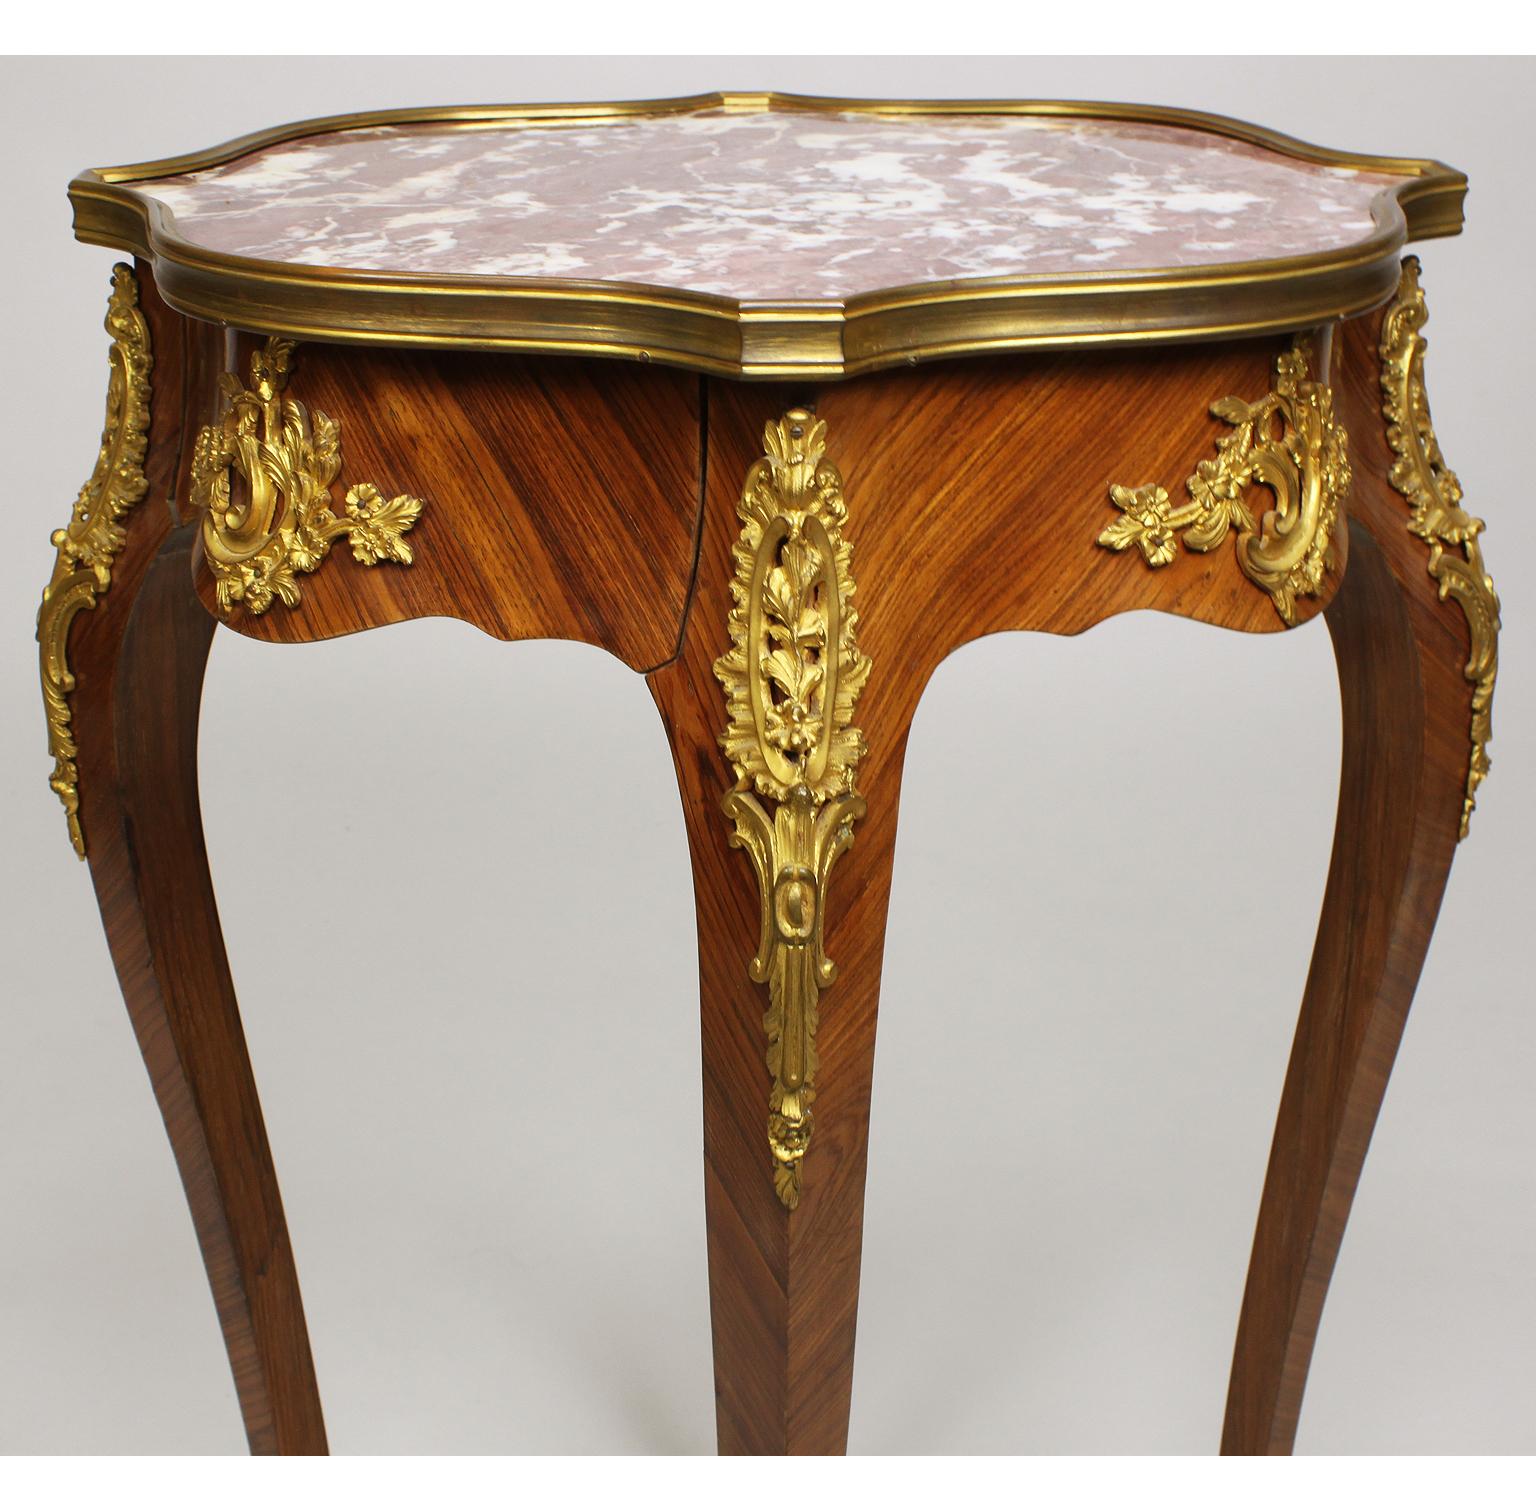 French 19th Century Louis XV Style Kingwood & Ormolu Mounted Side Table Gueridon In Good Condition For Sale In Los Angeles, CA